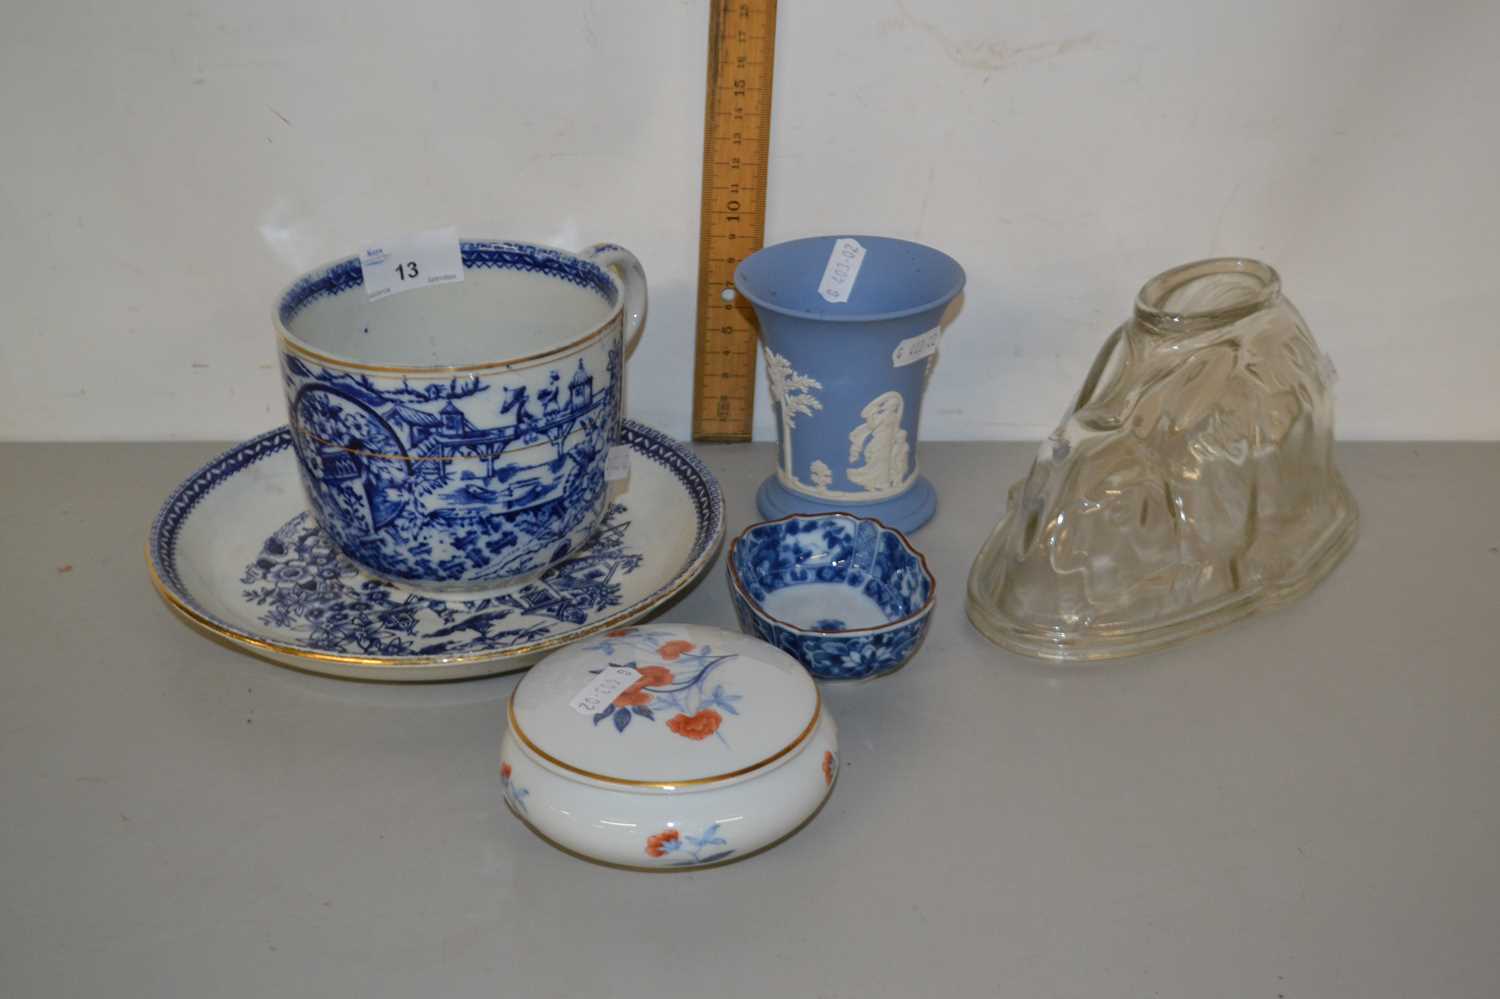 Mixed Lot: Glass jelly mould, Wedgwood Jasper ware vase, blue and white cup and saucer etc